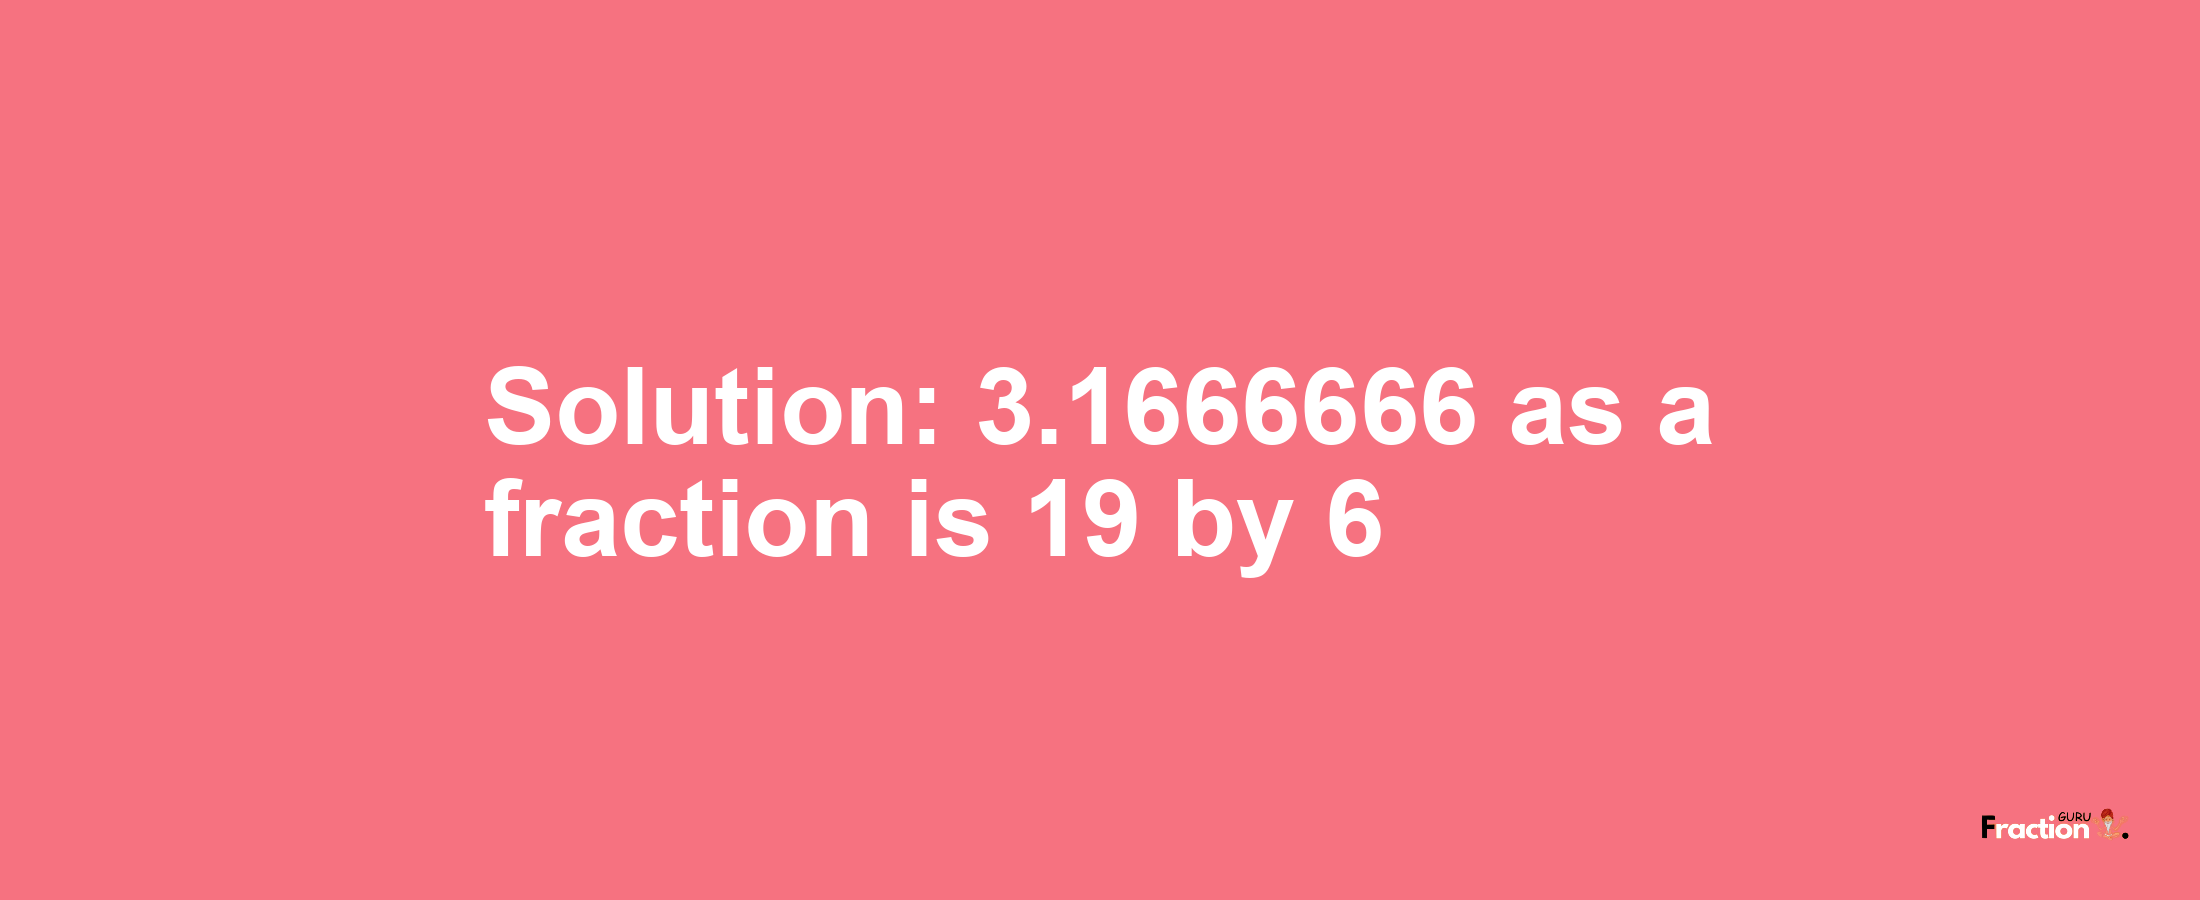 Solution:3.1666666 as a fraction is 19/6